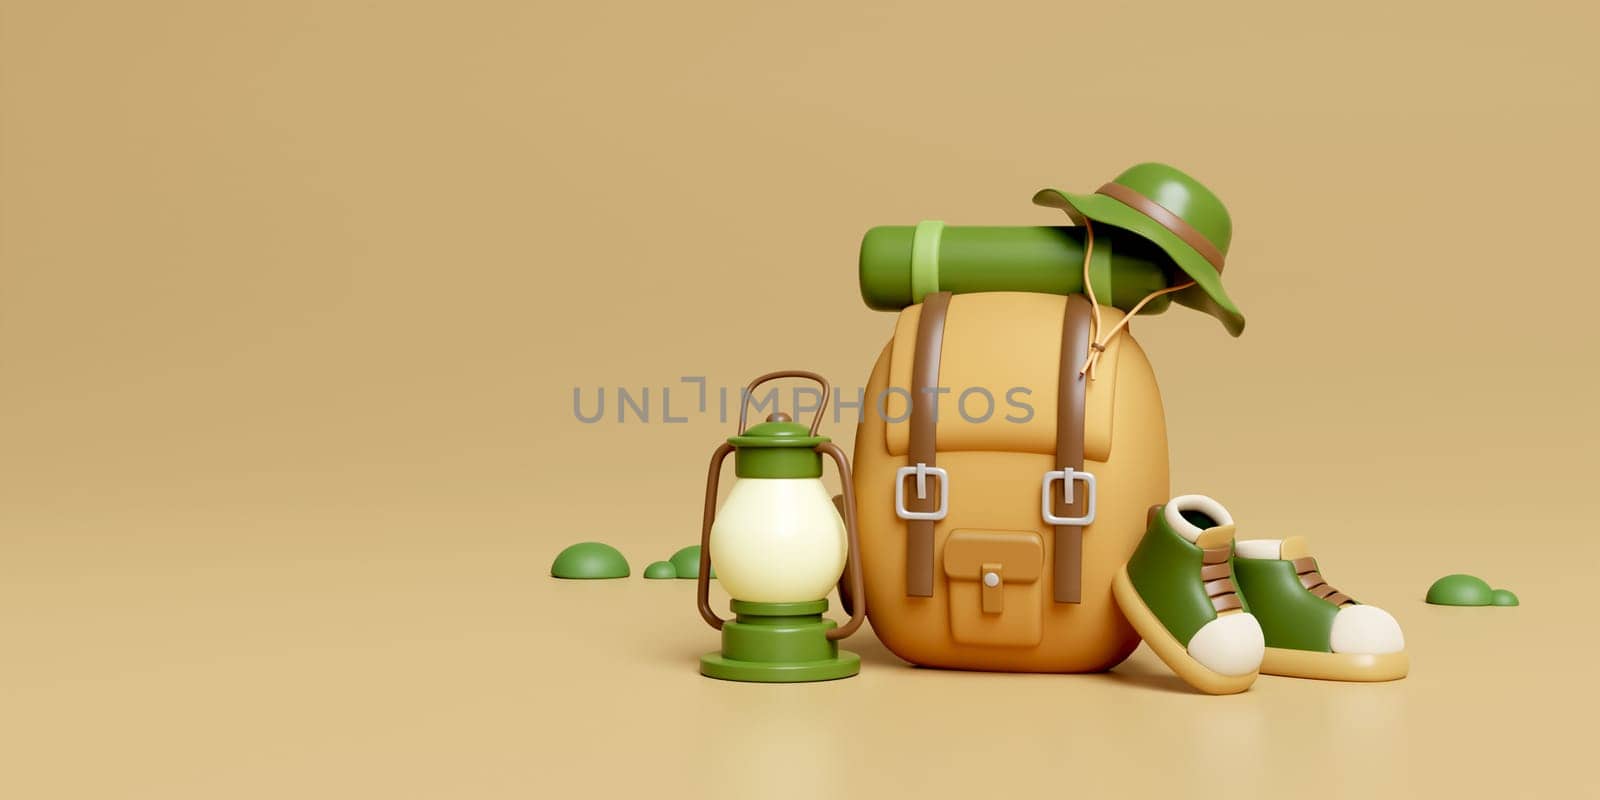 3d Backpacks and elements for camping, camp fire, trip, hiking. Concept. 3d rendering illustration. by meepiangraphic